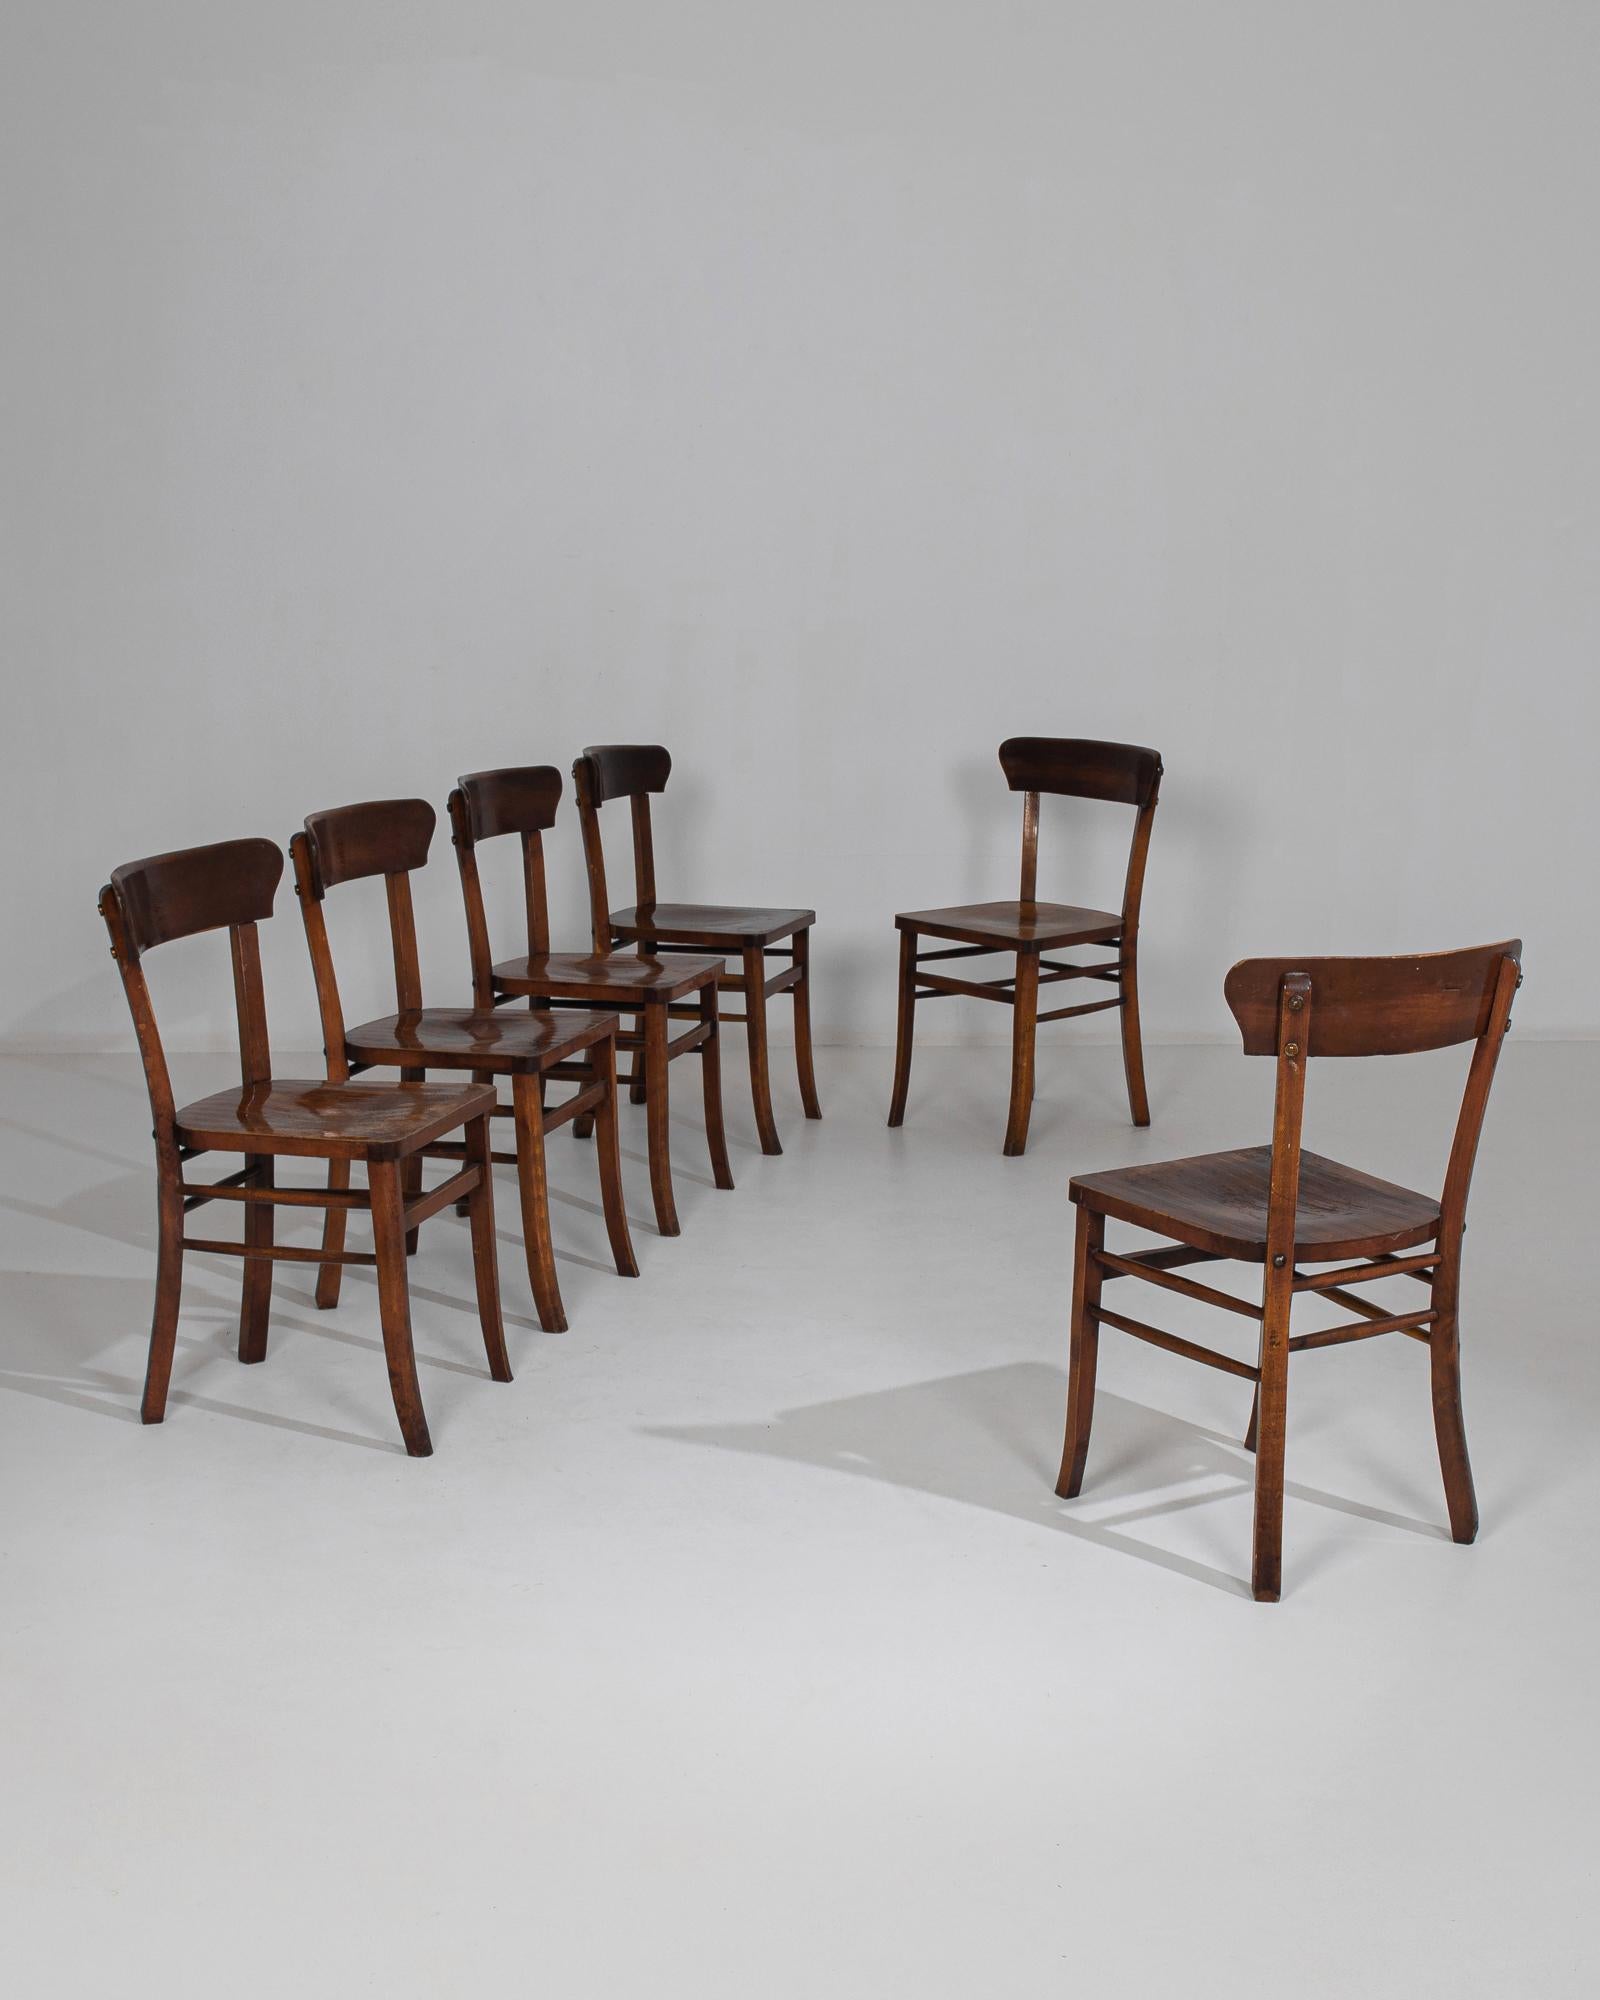 This set of six wooden dining chairs was made in Belgium, circa 1950. The streamlined design highlights the chairs' subtle features, from the gentle indentation on the seats to the curves of the splayed legs and top rail. Beautifully weathered with